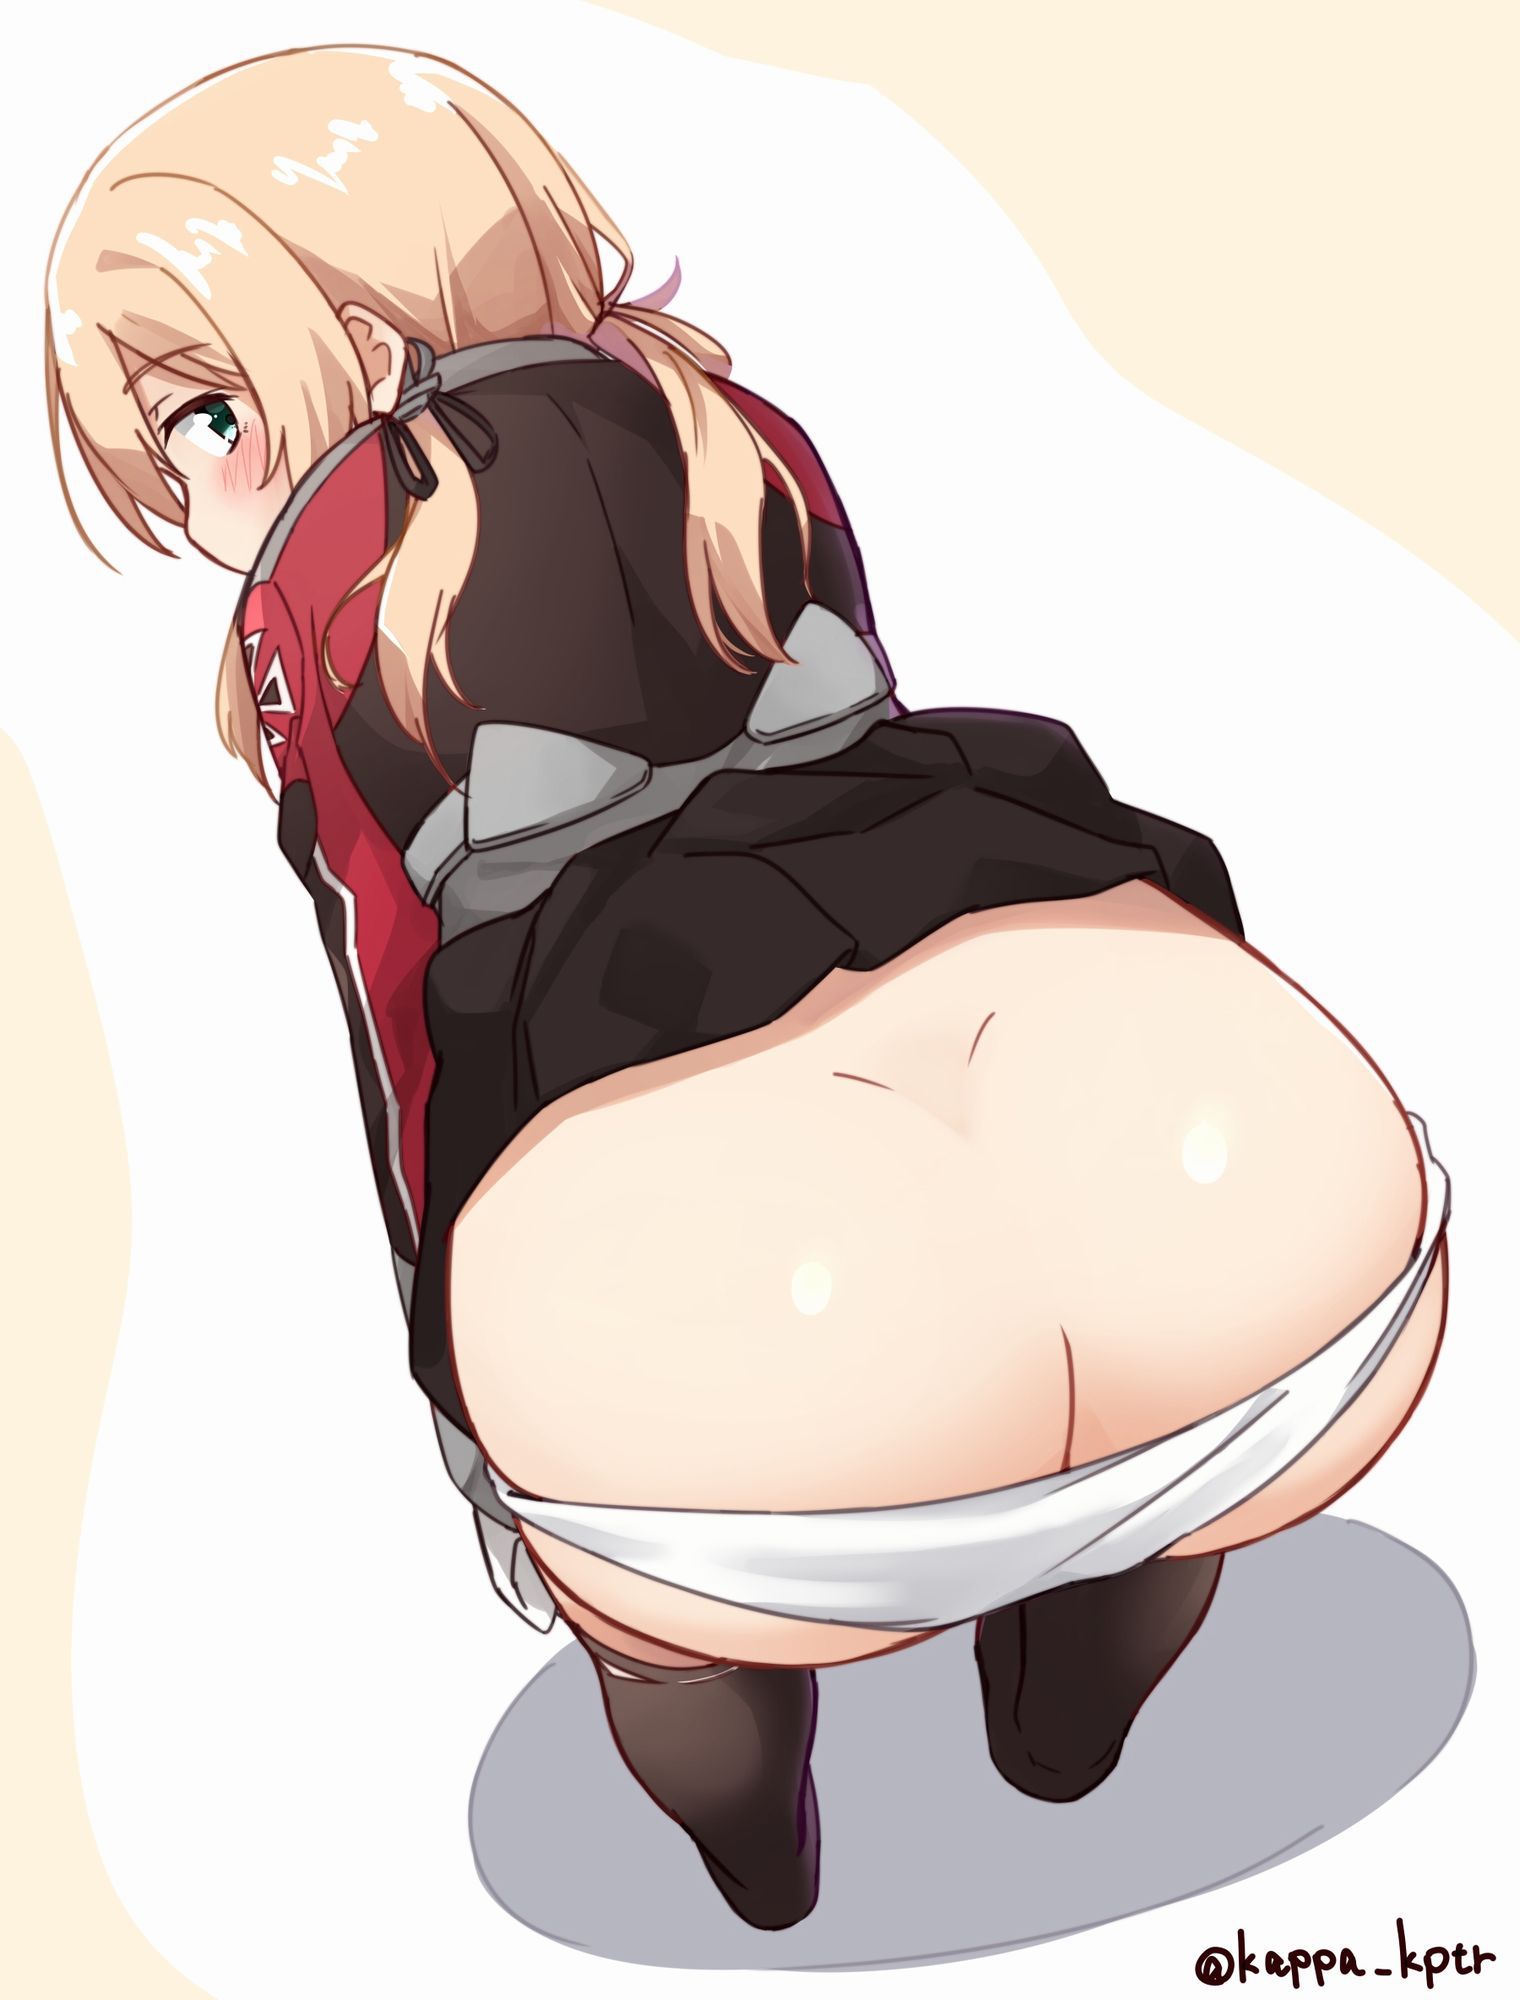 [Secondary/ZIP] Naughty second image of a pretty girl over pants off 41